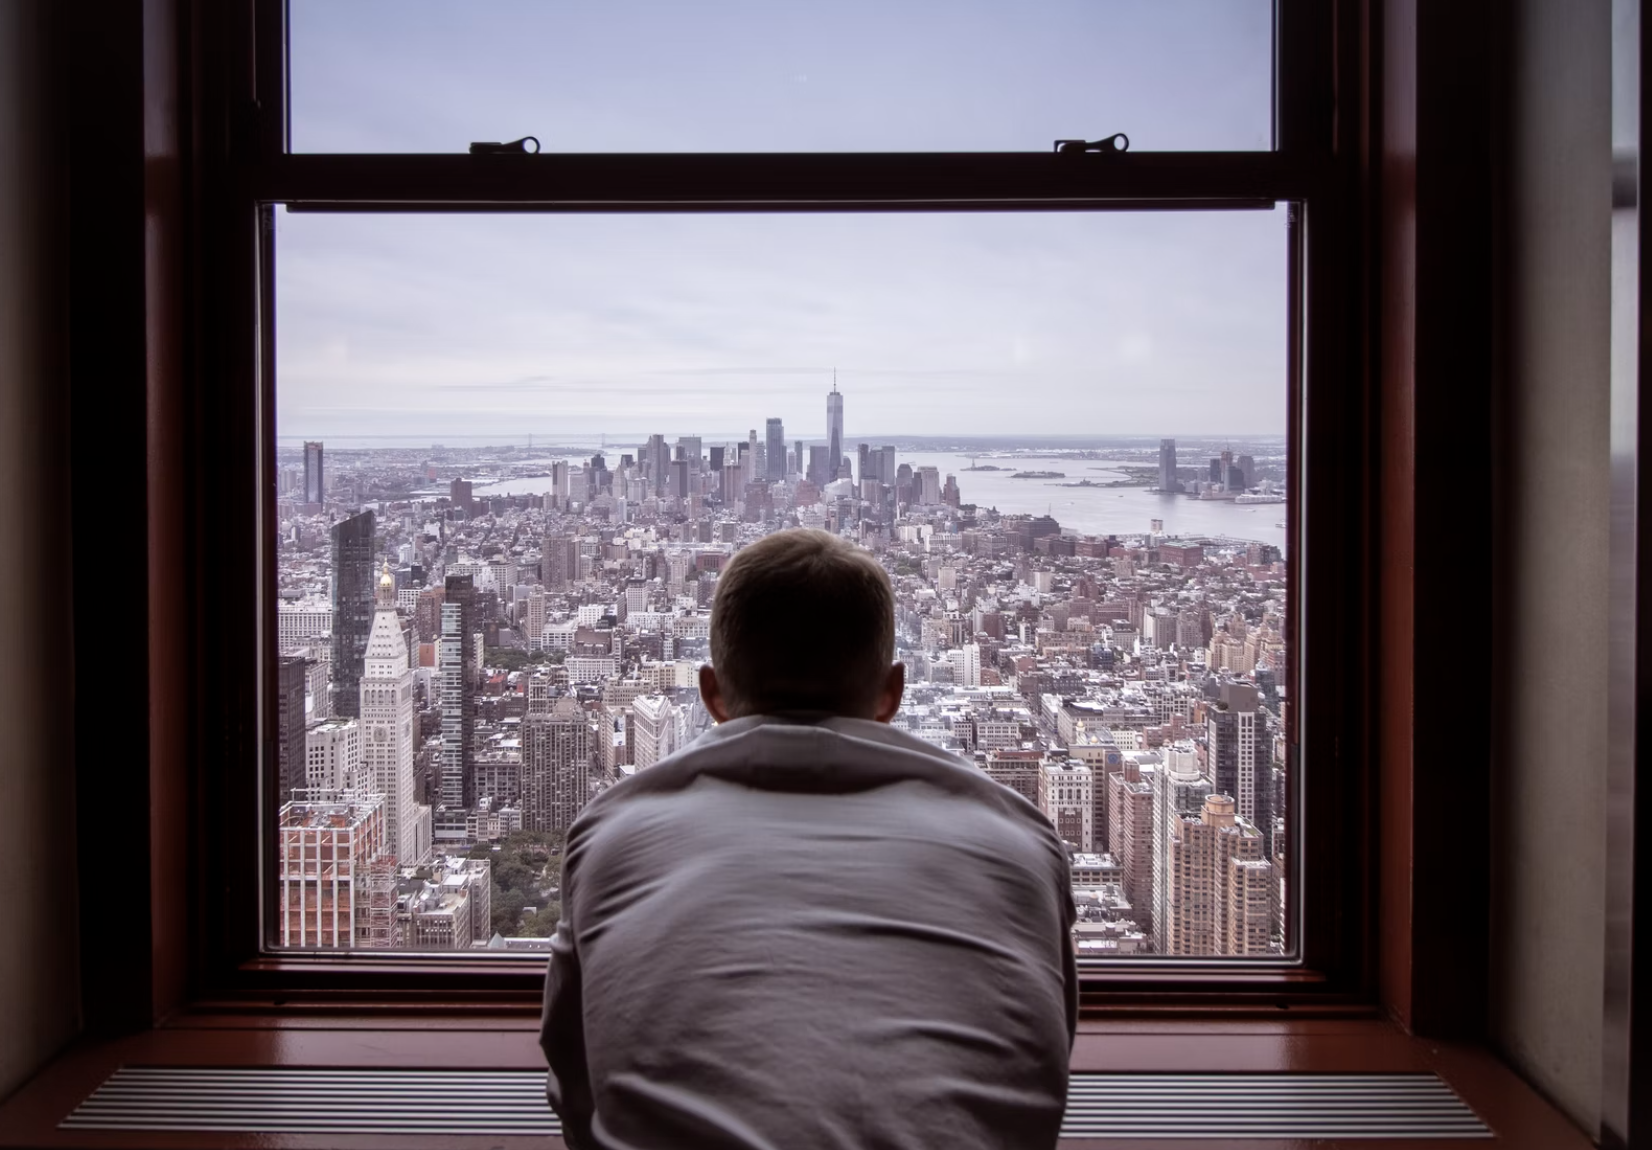 Man sitting and looking out window high above New York City